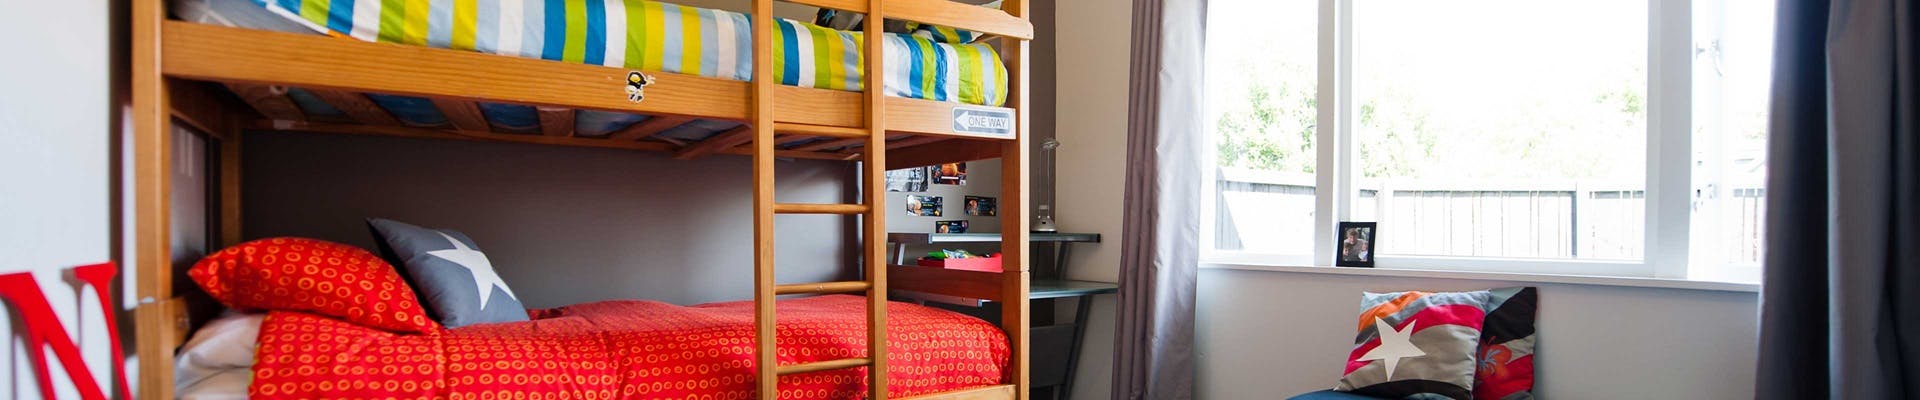 a bunk bed in a room